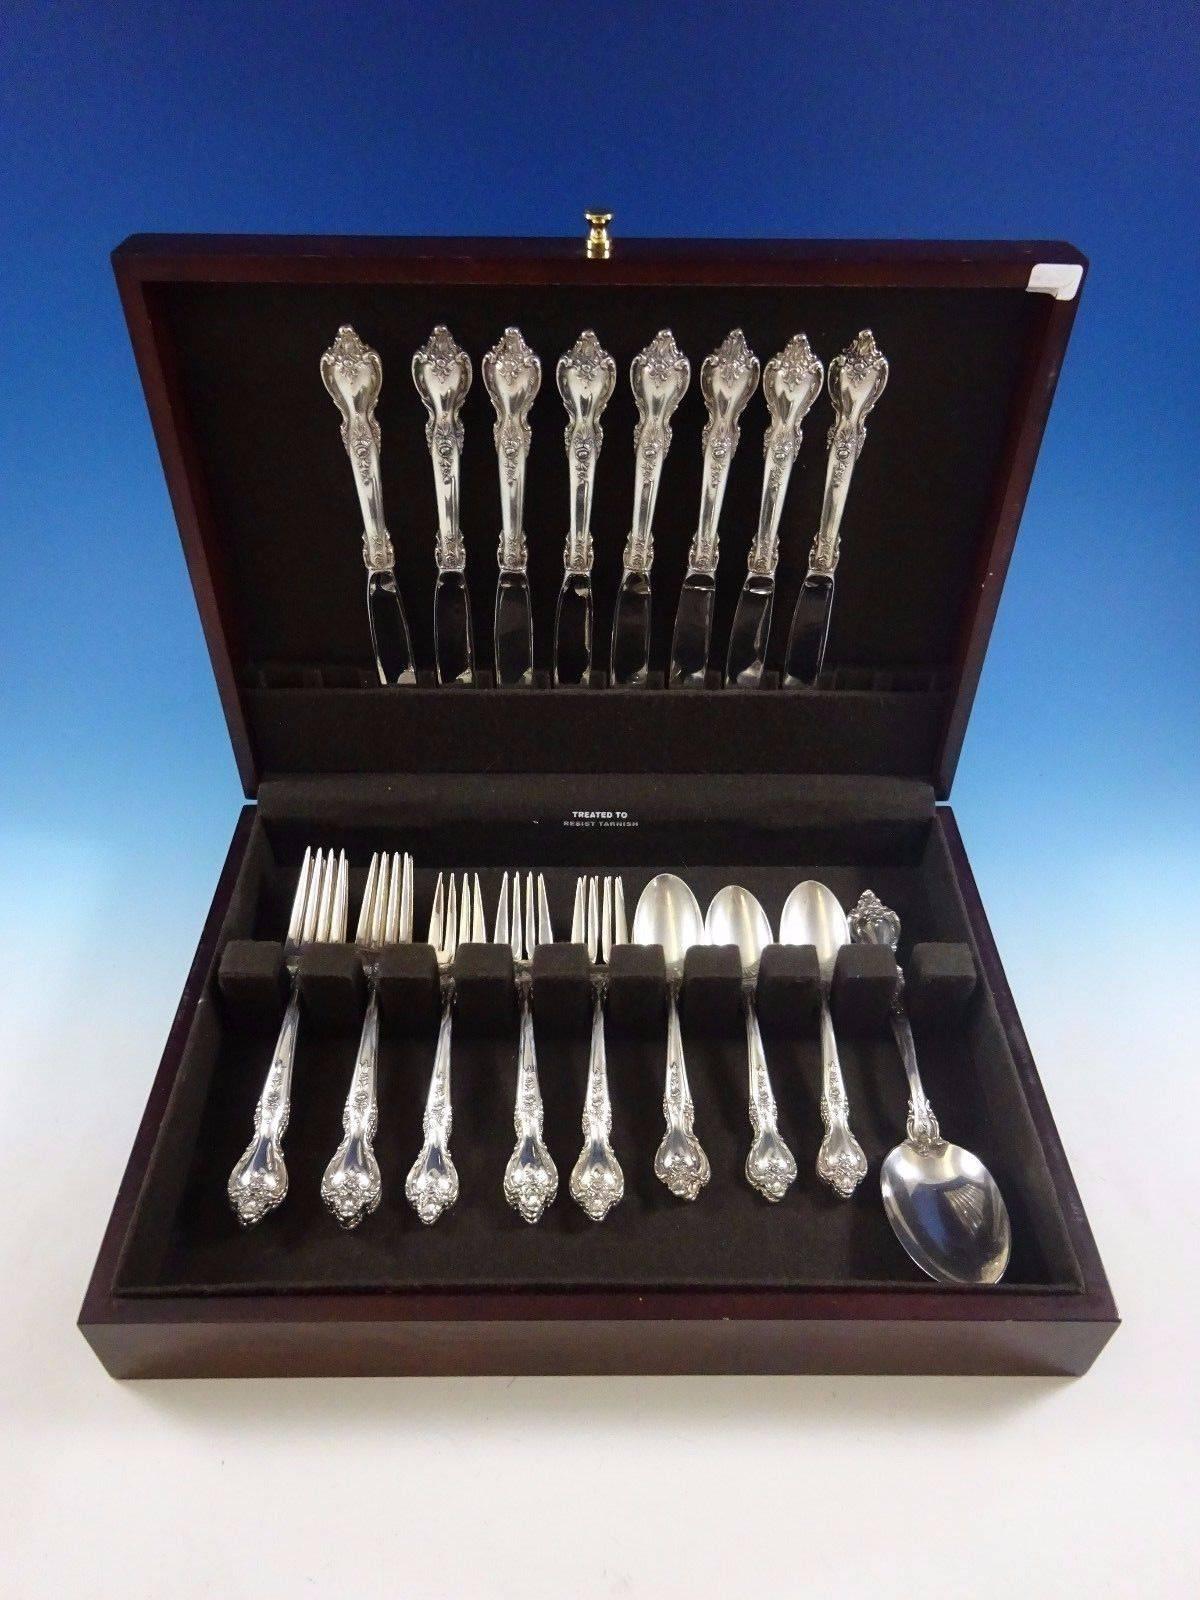 Delacourt by Lunt sterling silver flatware set of 33 pieces. This set includes:

Eight knives, 9 1/4